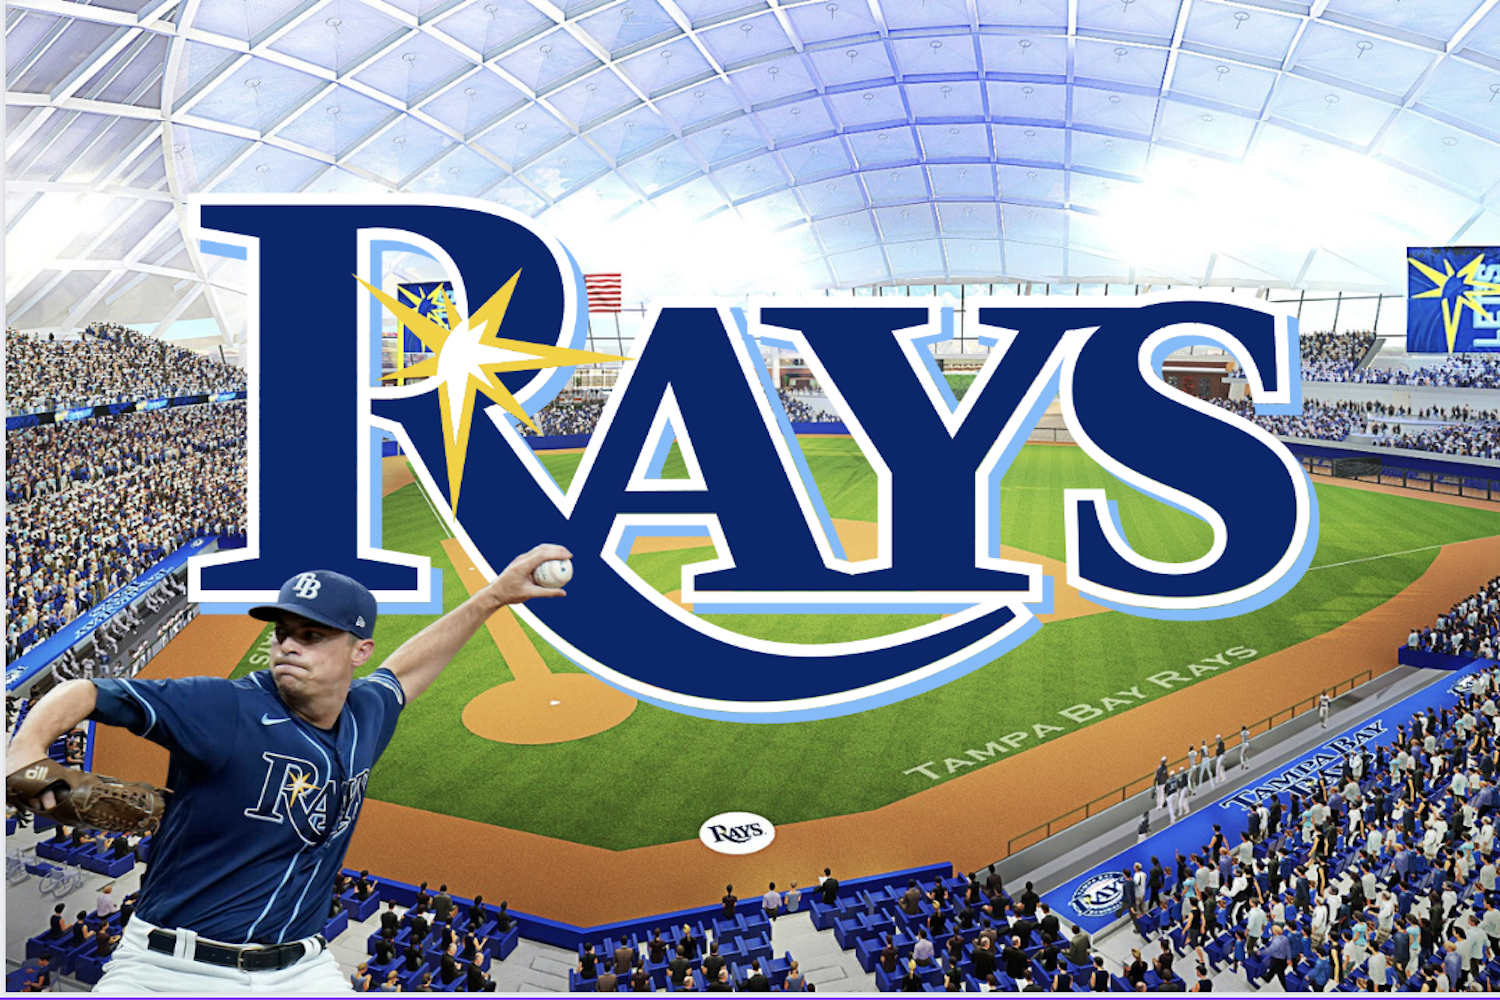 The Rays announce plans for a new stadium in 2028 – Achona